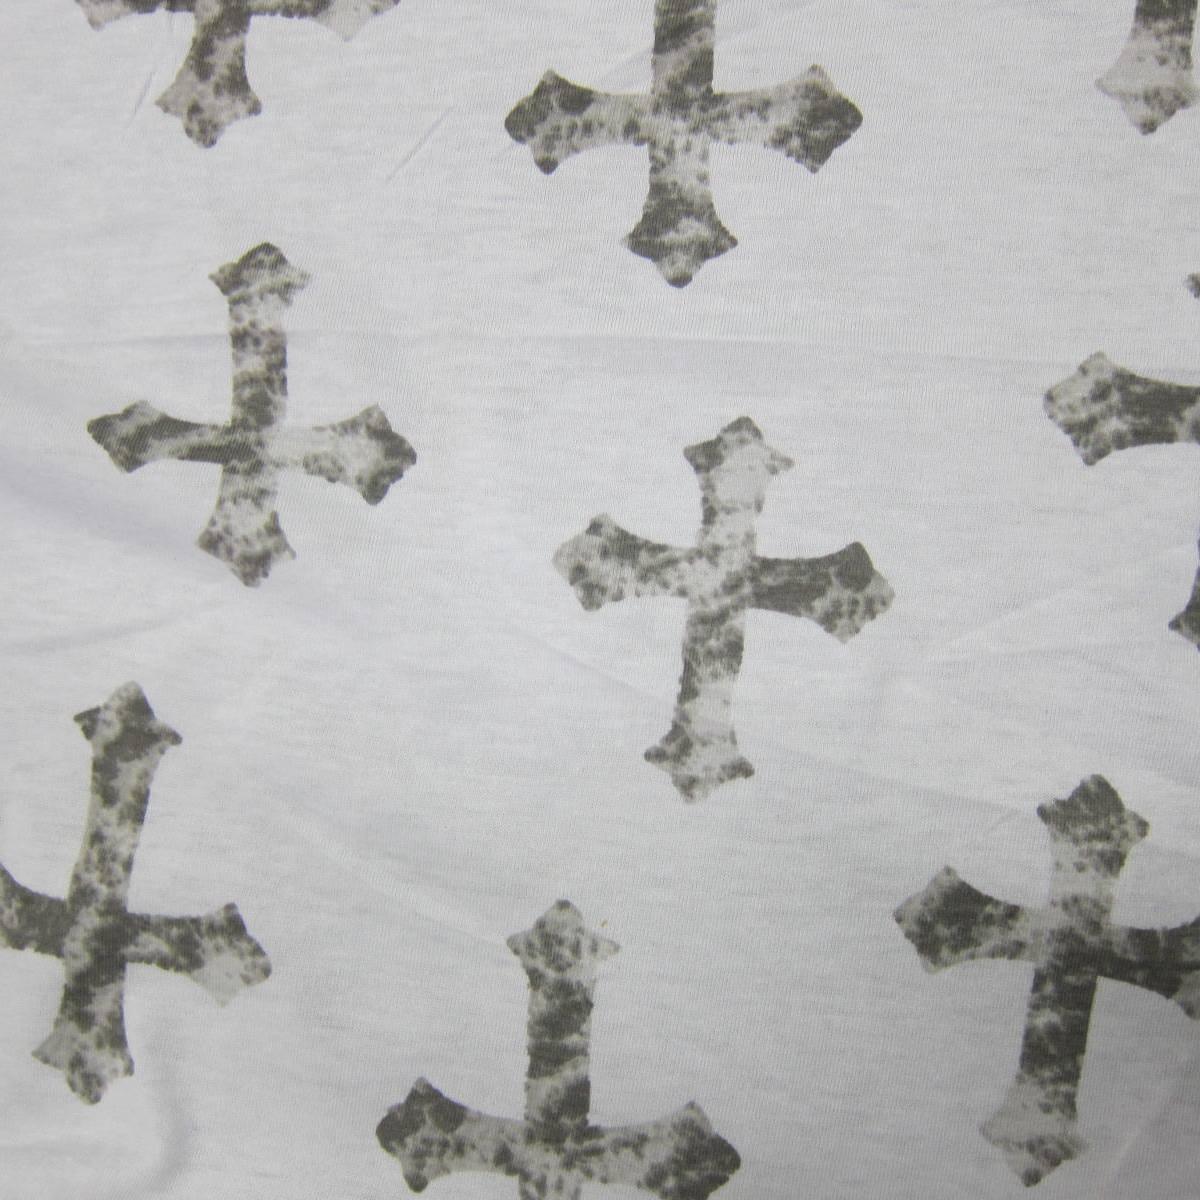 Distressed Gray Crosses on White Cotton Jersey